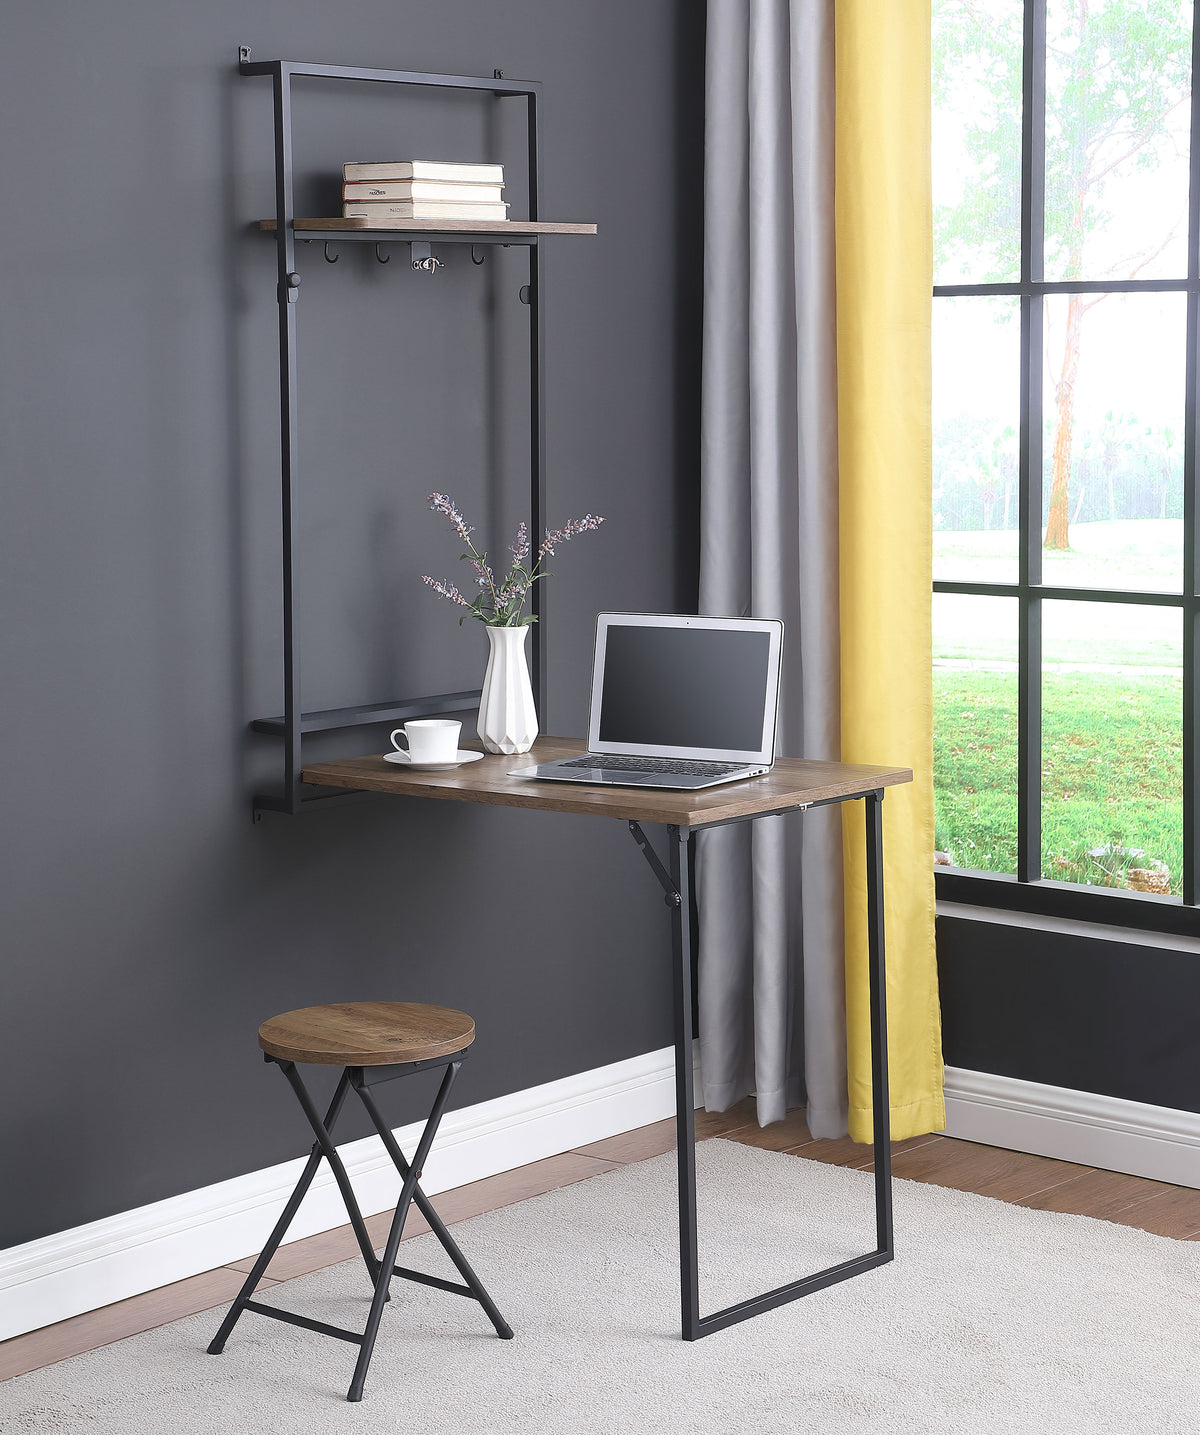 Riley Foldable Wall Desk with Stool Rustic Oak and Sandy Black  Half Price Furniture